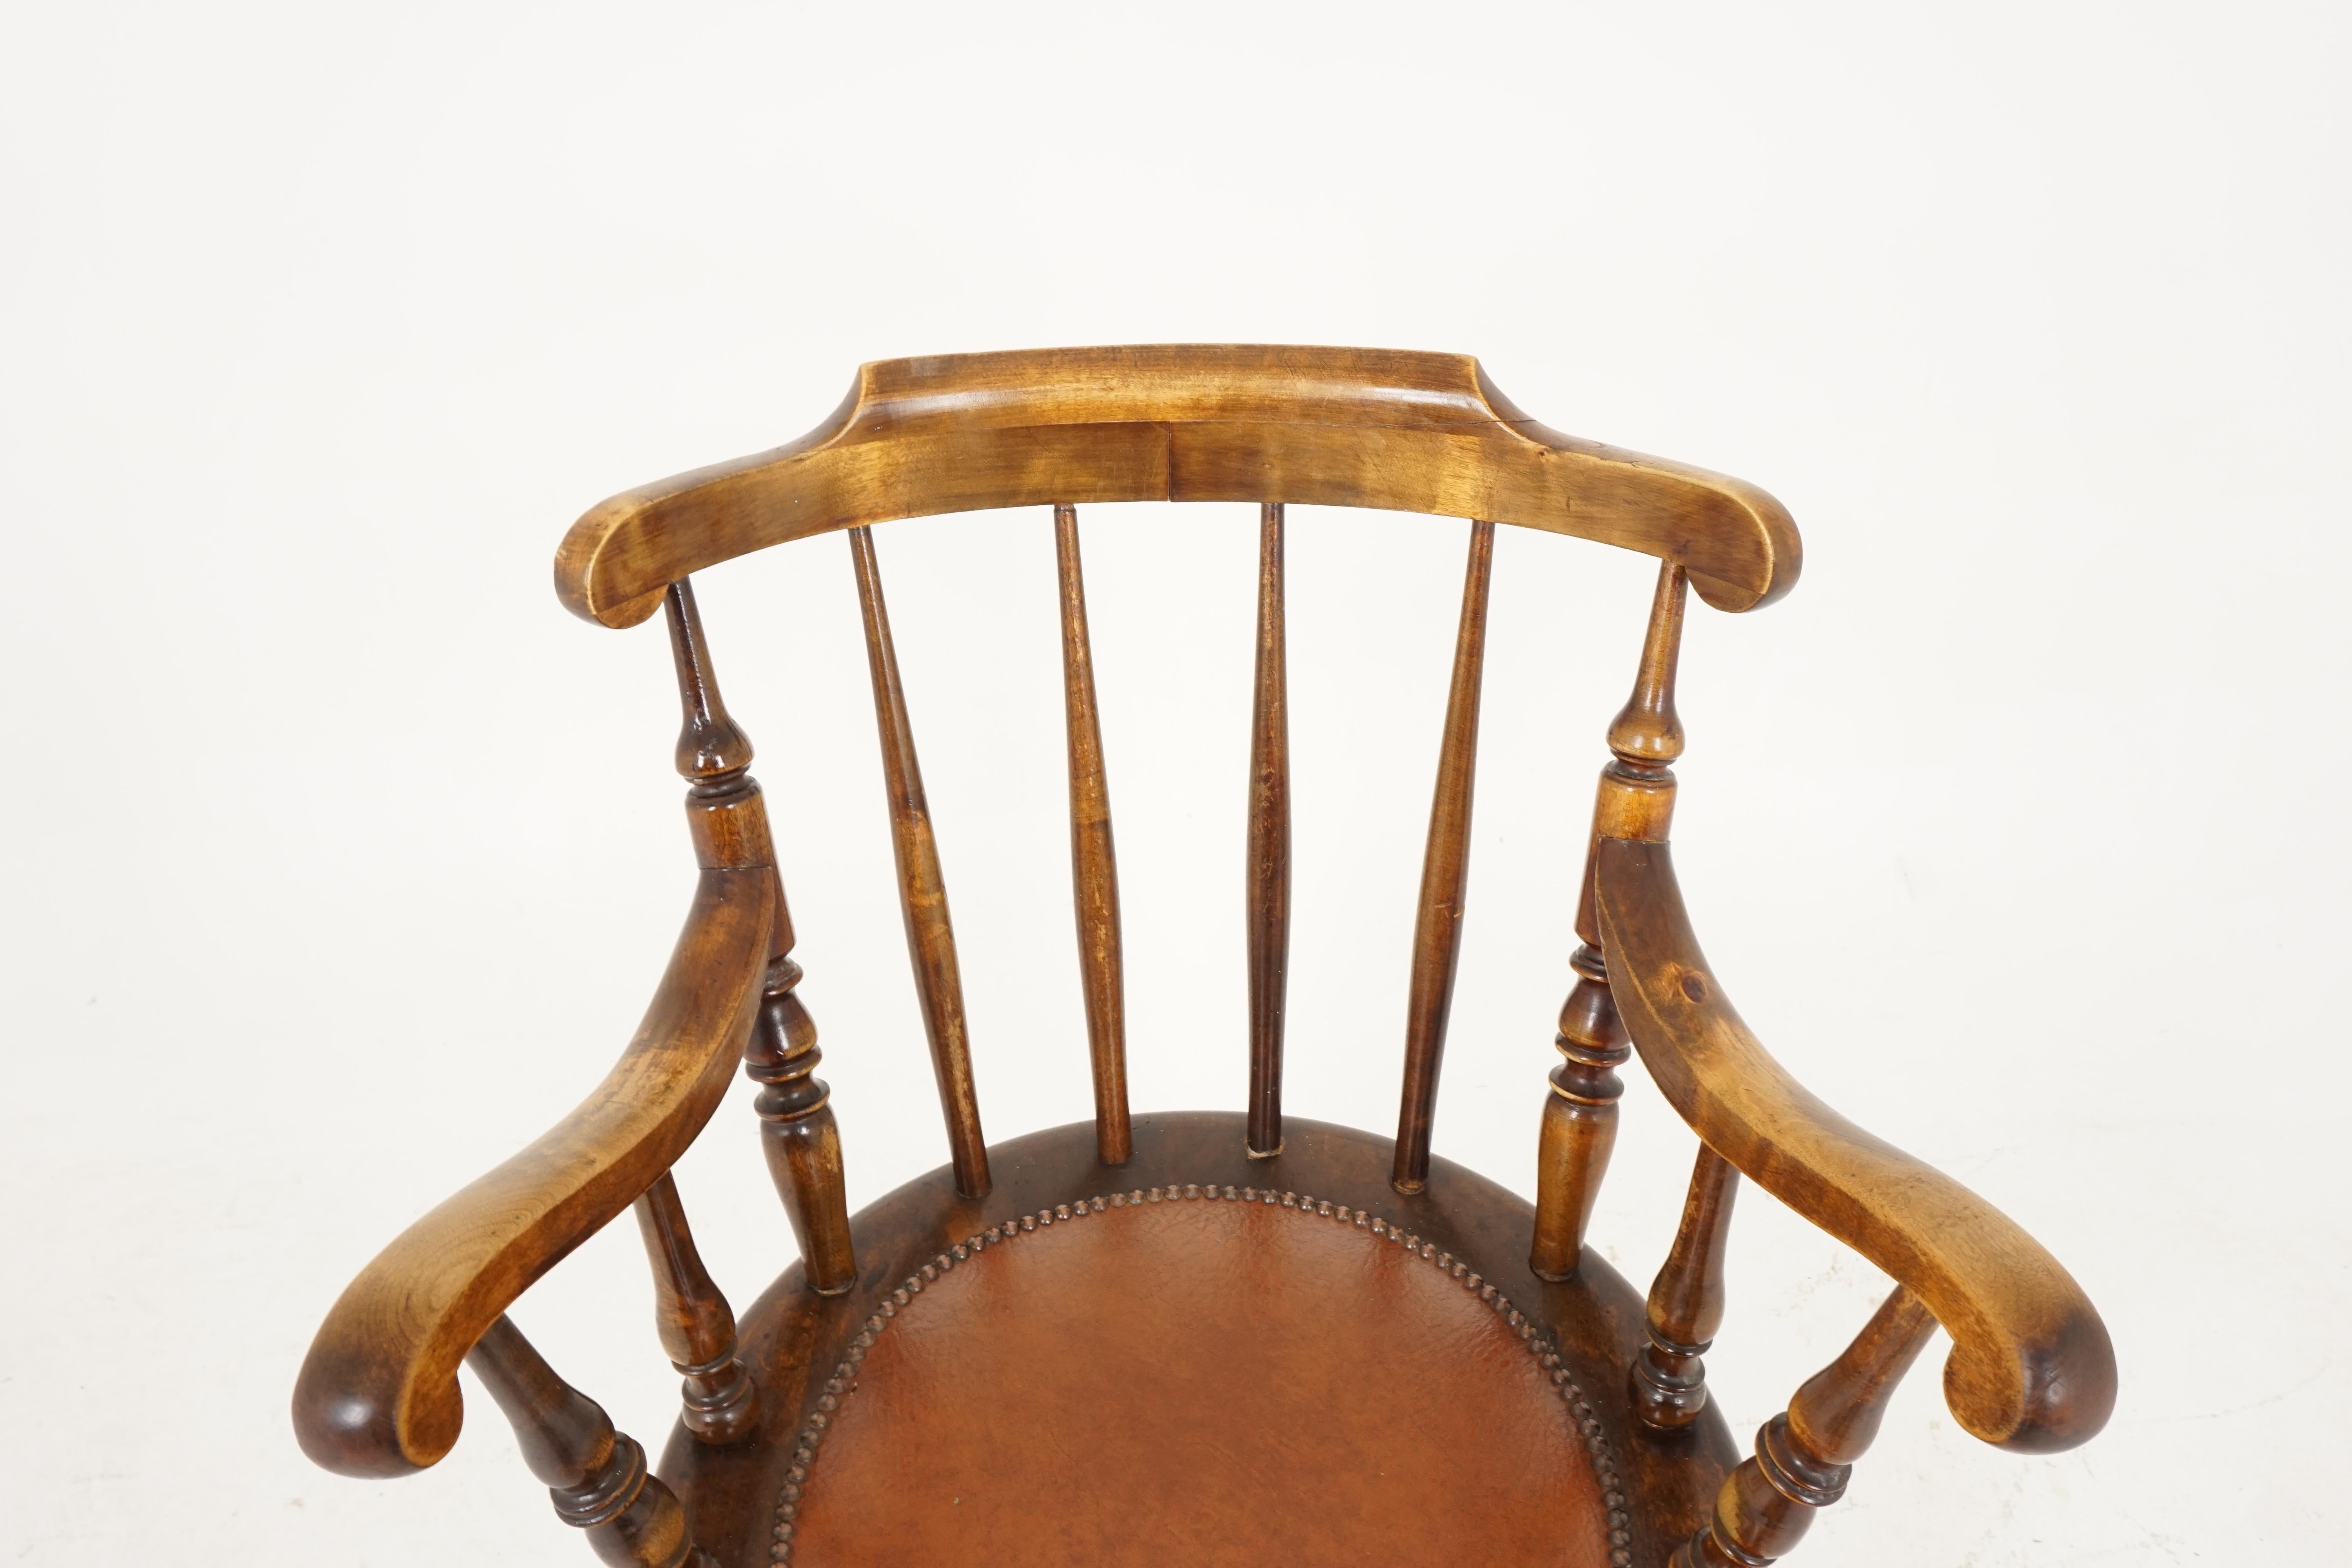 Hand-Crafted Antique Windsor Style Arm Chair, Open Arm Chair, Scotland 1830, B2461